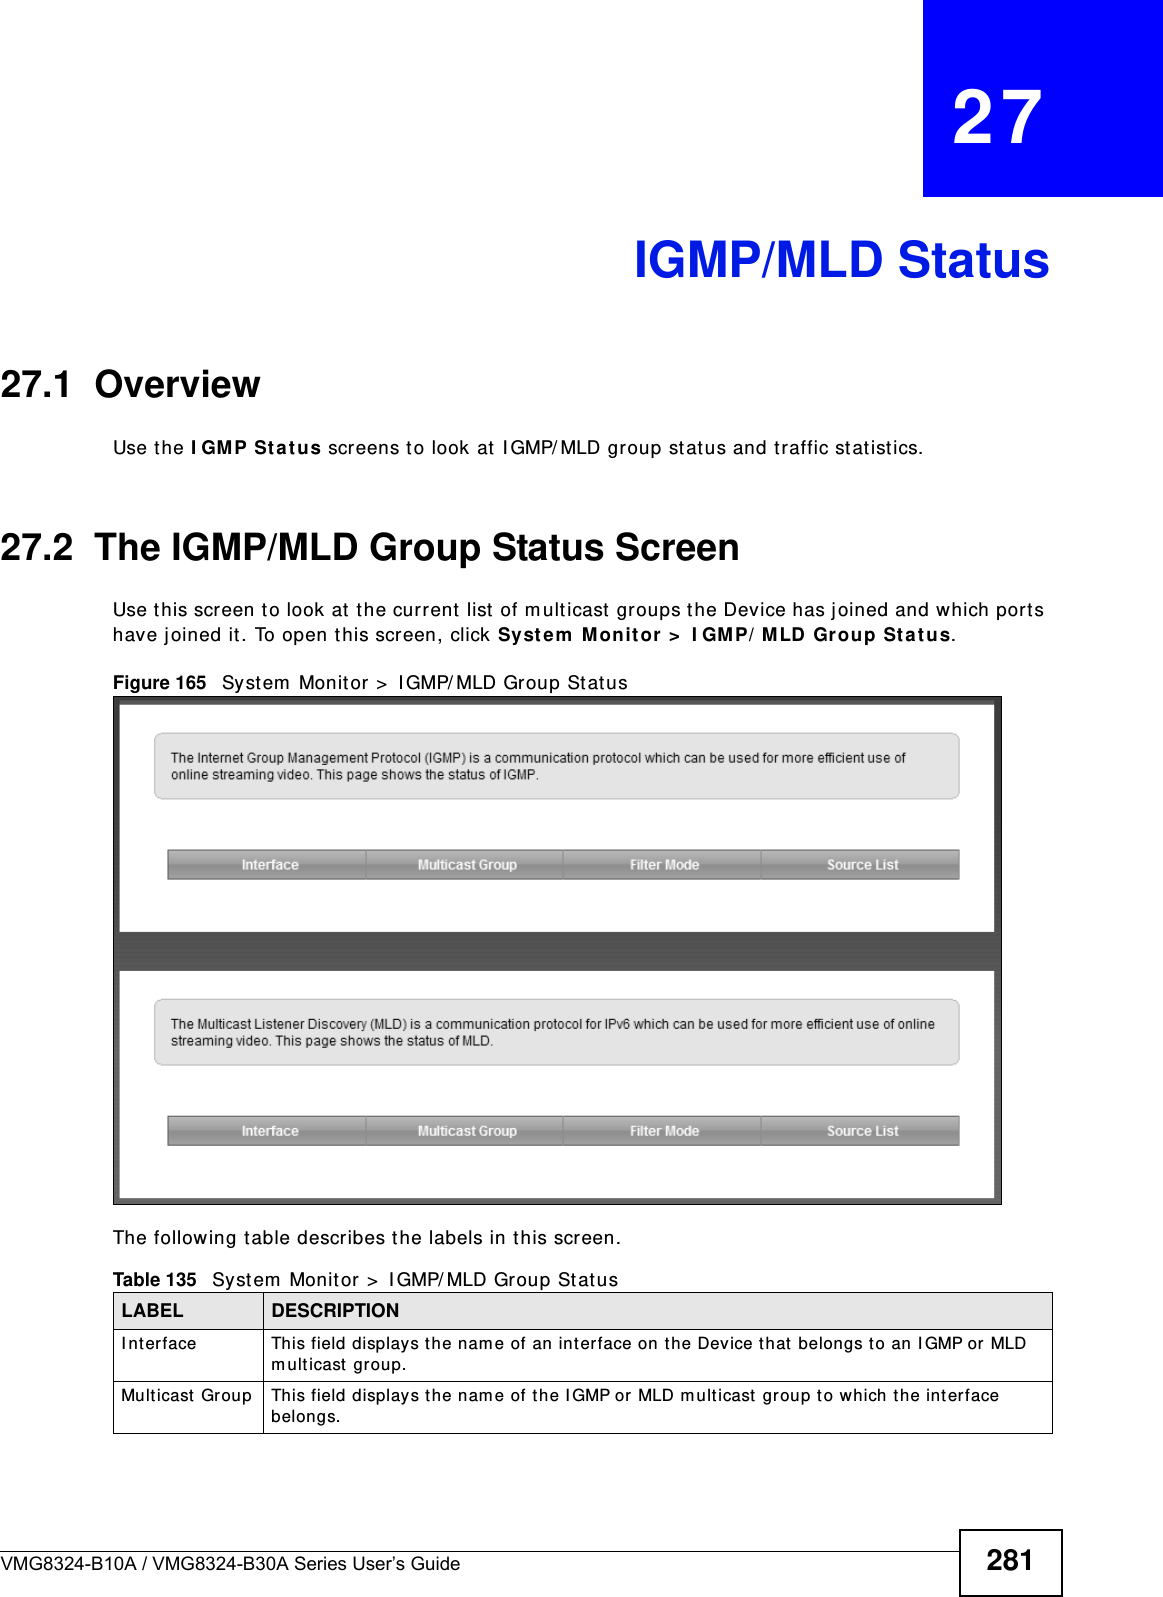 VMG8324-B10A / VMG8324-B30A Series User’s Guide 281CHAPTER   27IGMP/MLD Status27.1  OverviewUse t he I GM P St at us screens to look at I GMP/ MLD group stat us and traffic stat ist ics. 27.2  The IGMP/MLD Group Status ScreenUse t his screen t o look at  the current list  of m ult icast  groups the Device has j oined and which ports have joined it . To open this screen, click Syste m  Monit or &gt;  I GM P/ M LD Gr oup Sta tus.Figure 165   Syst em  Monit or &gt;  I GMP/ MLD Group St atusThe following t able describes the labels in t his screen.Table 135   System  Monitor &gt;  I GMP/ MLD Group Stat usLABEL DESCRIPTIONI nt erface This field displays the nam e of an interface on t he Device that belongs t o an I GMP or MLD m ult icast  group. Multicast  Group This field displays t he nam e of the IGMP or MLD m ult icast group to which the interface belongs. 